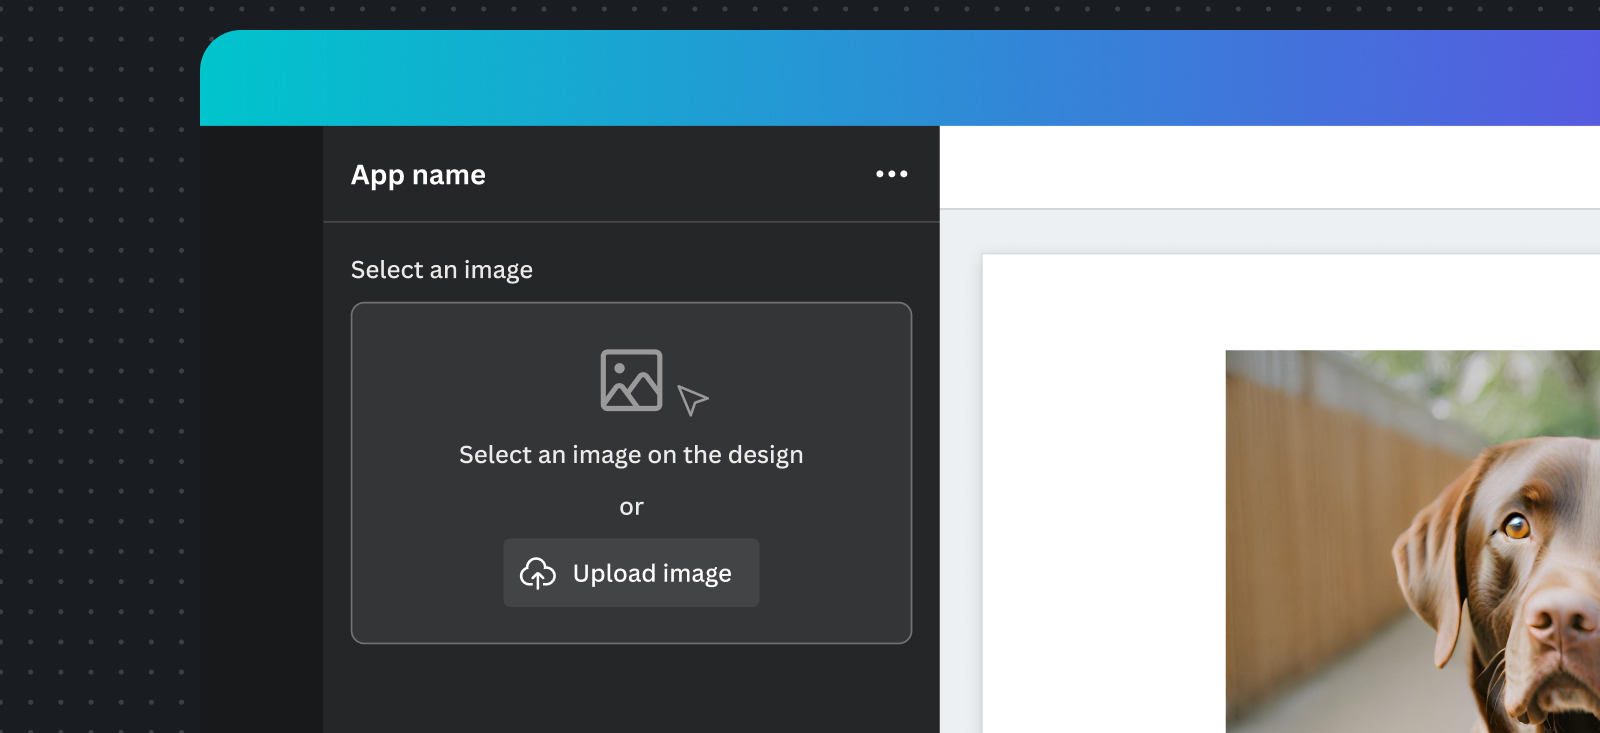 The image selection UI for an overlay